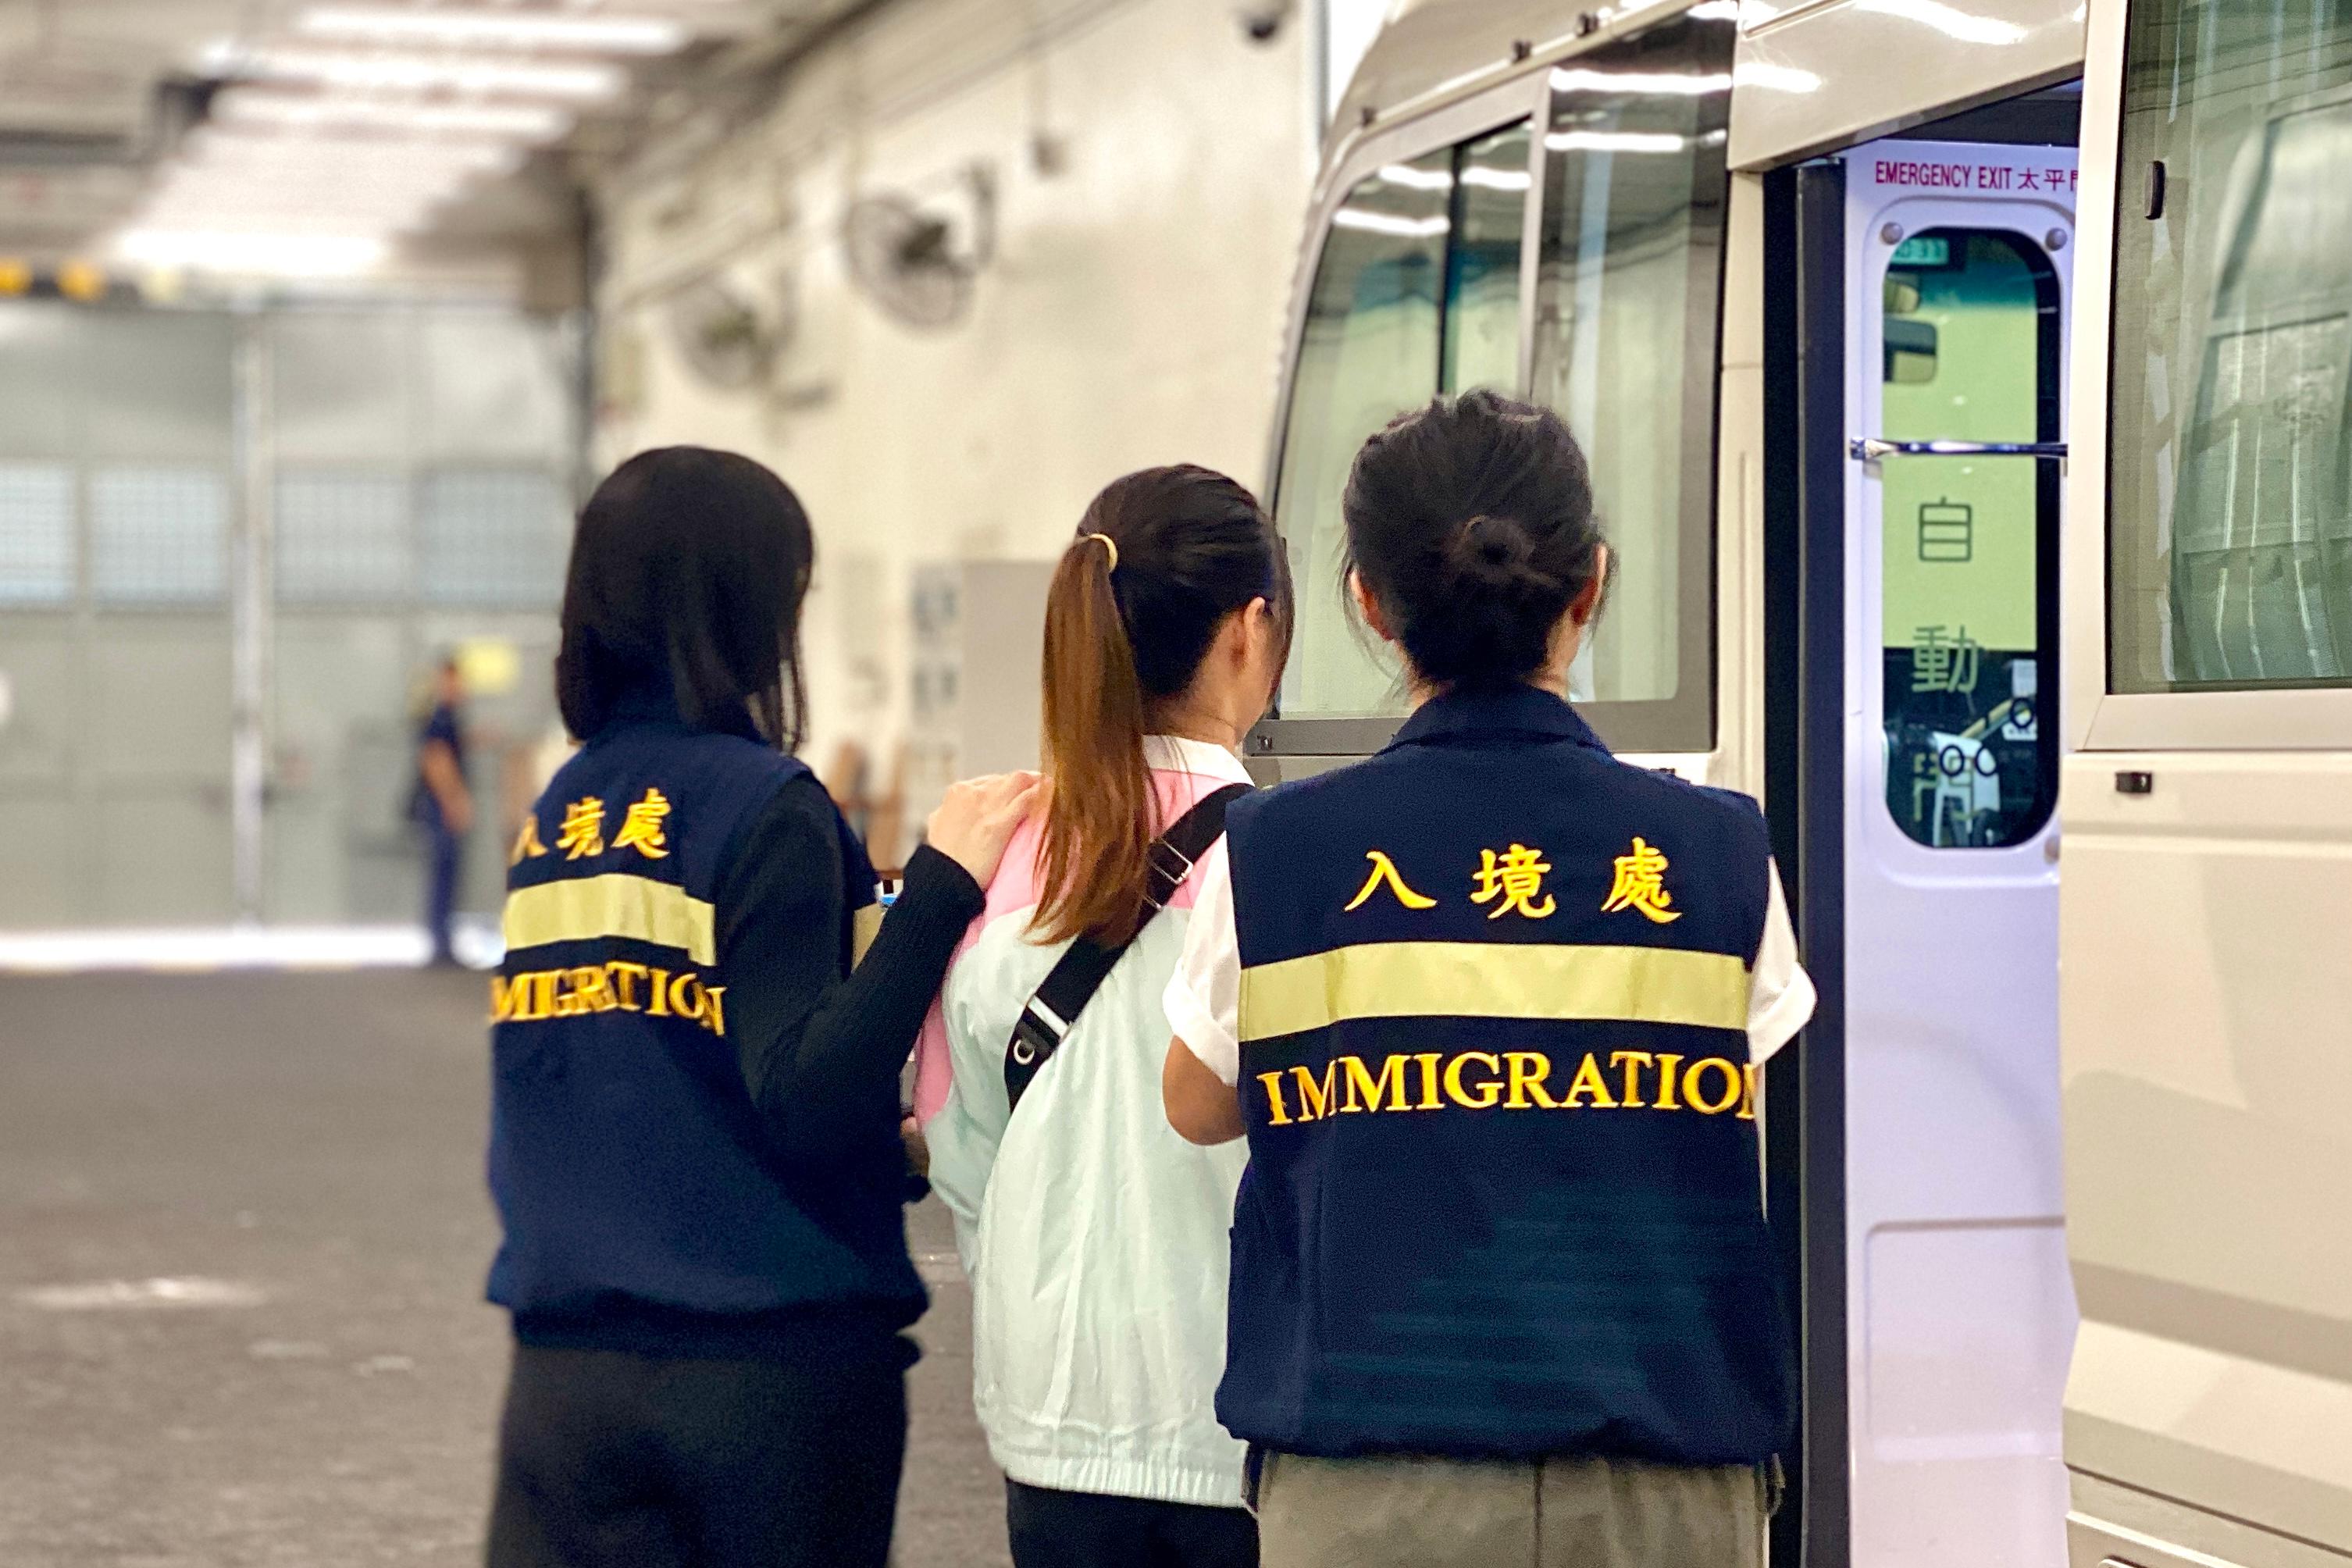 The Immigration Department (ImmD) carried out a repatriation operation today (September 28). A total of 23 Vietnamese illegal immigrants were repatriated to Vietnam. Photo shows removees being escorted by ImmD officers to proceed from the detention place to the airport.